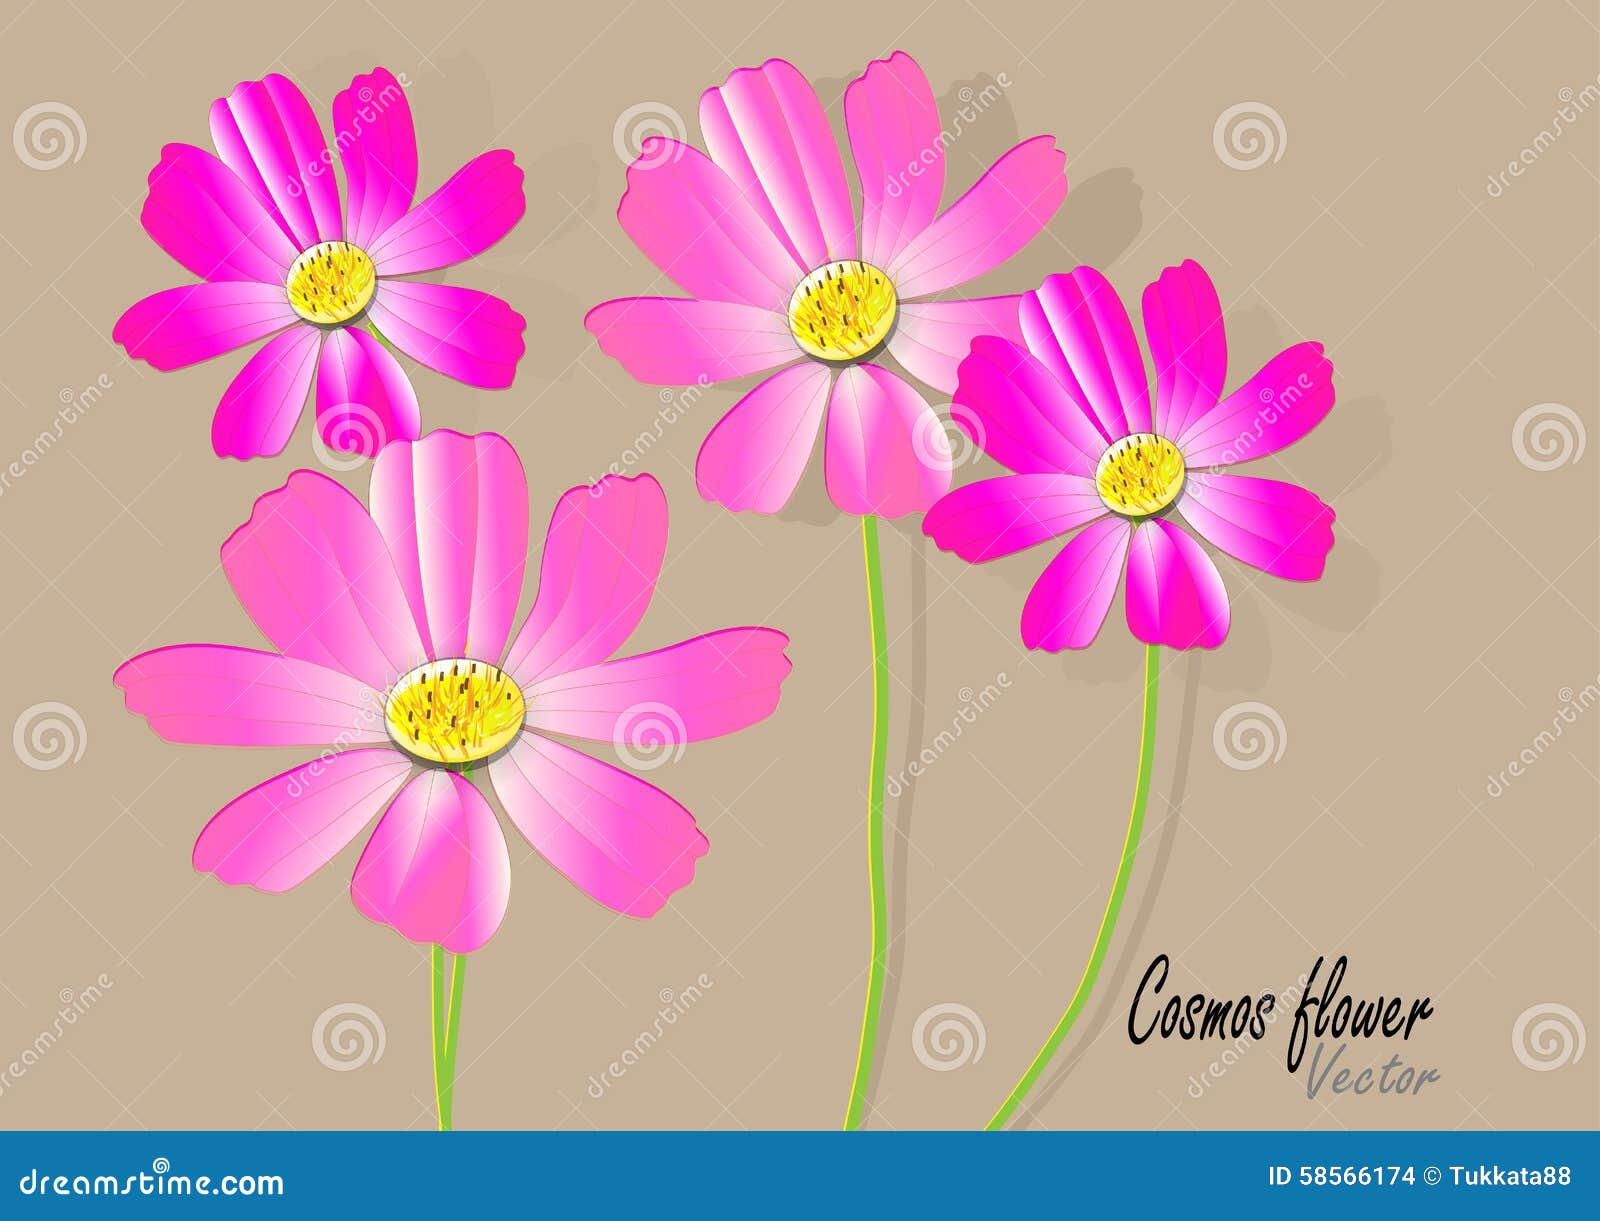 clipart of cosmos flower - photo #48